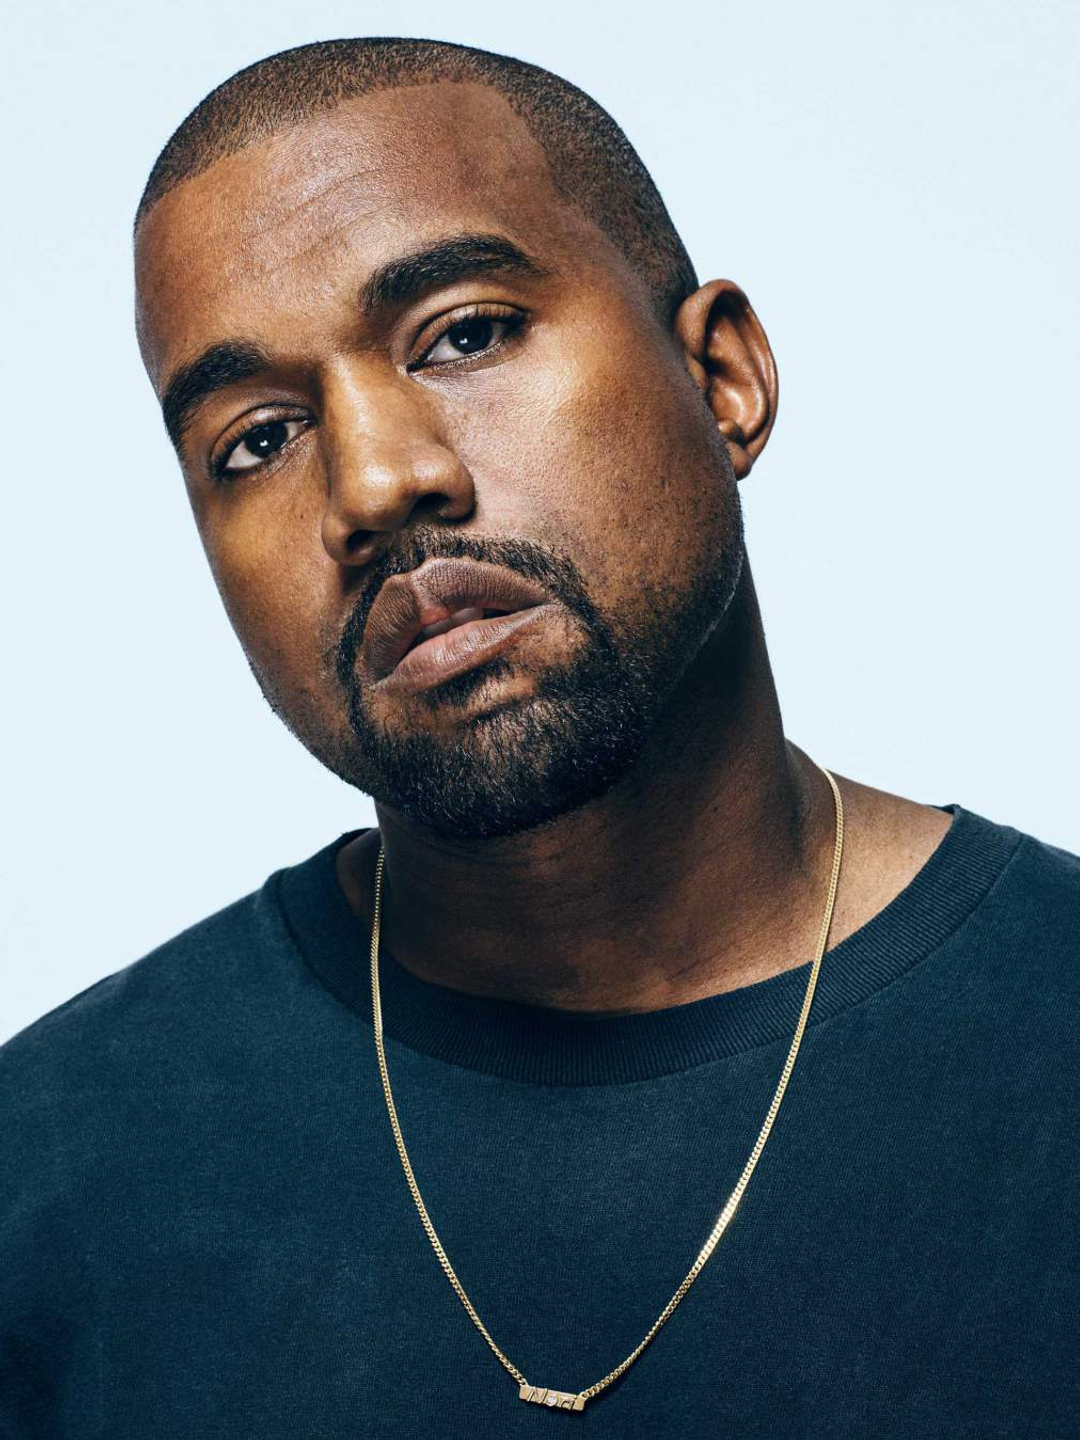 Kanye West who is his mother